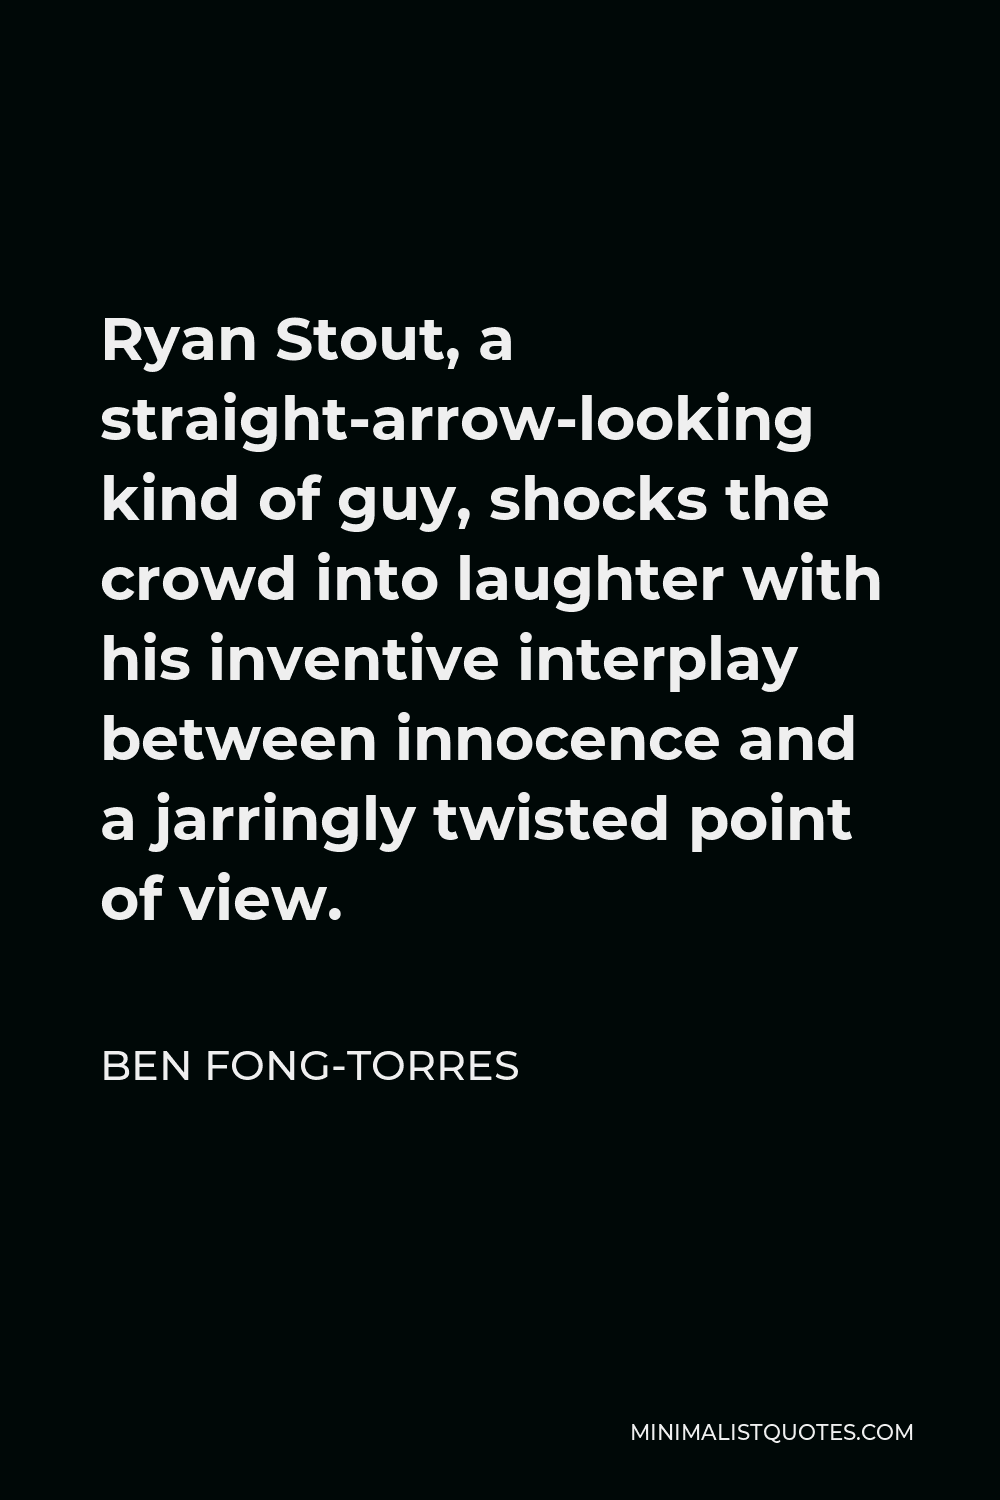 Ben Fong-Torres Quote - Ryan Stout, a straight-arrow-looking kind of guy, shocks the crowd into laughter with his inventive interplay between innocence and a jarringly twisted point of view.